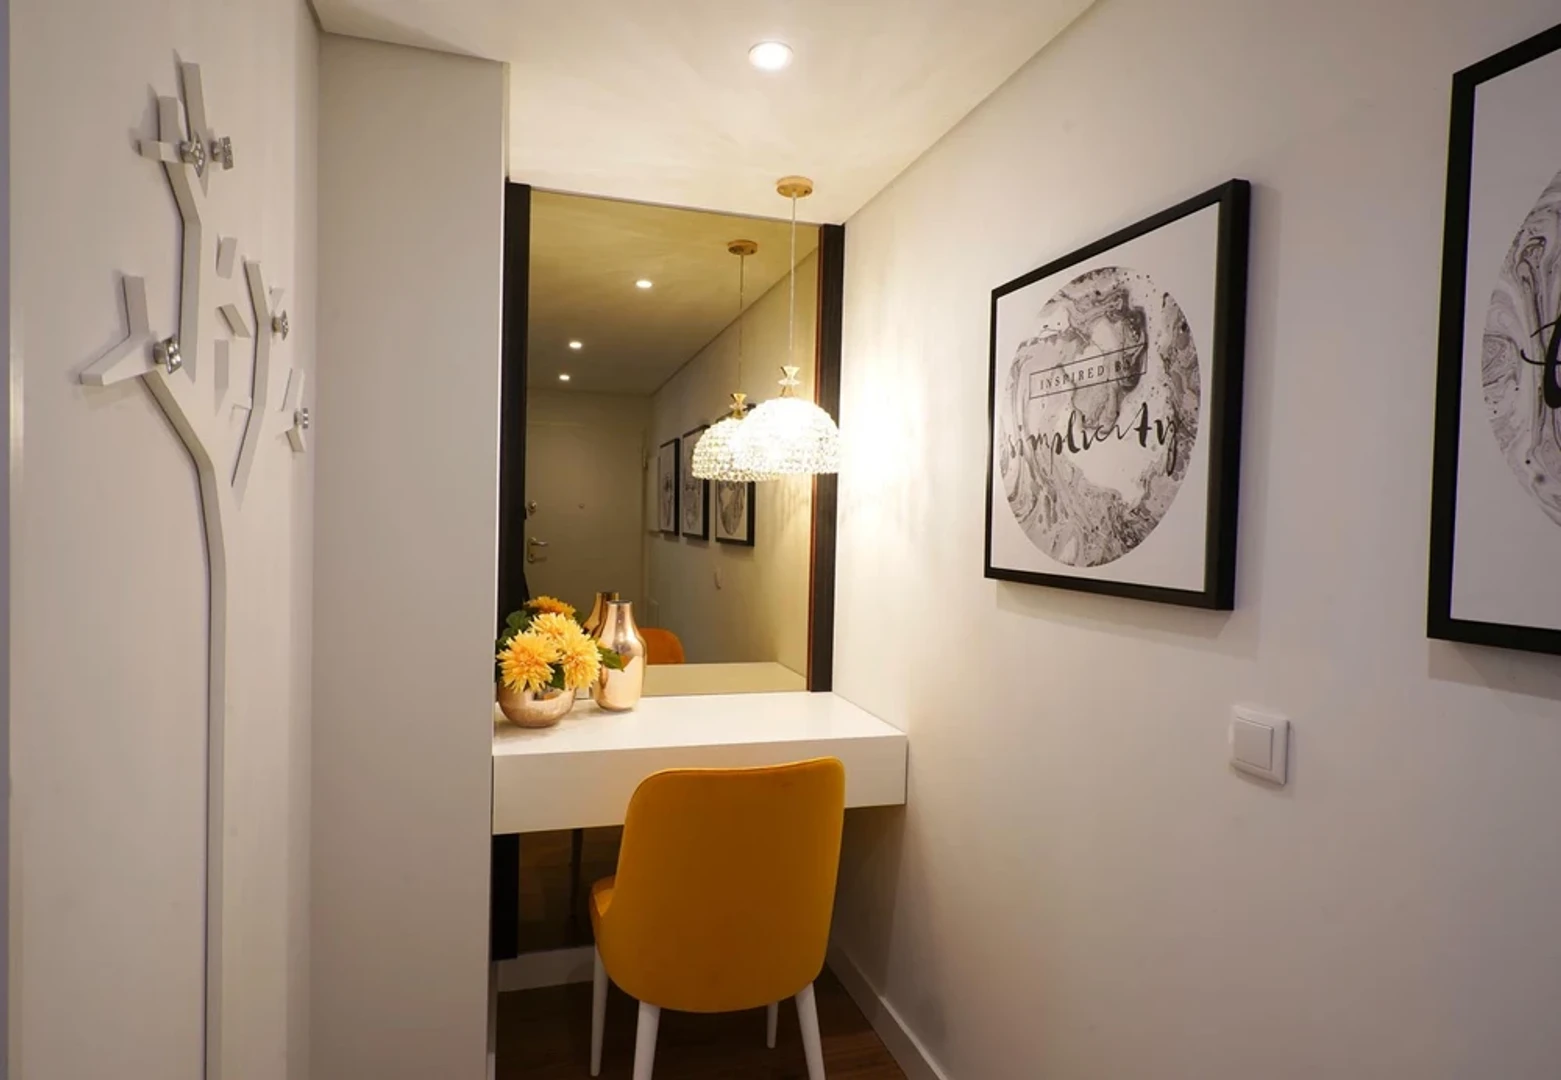 Two bedroom accommodation in Porto